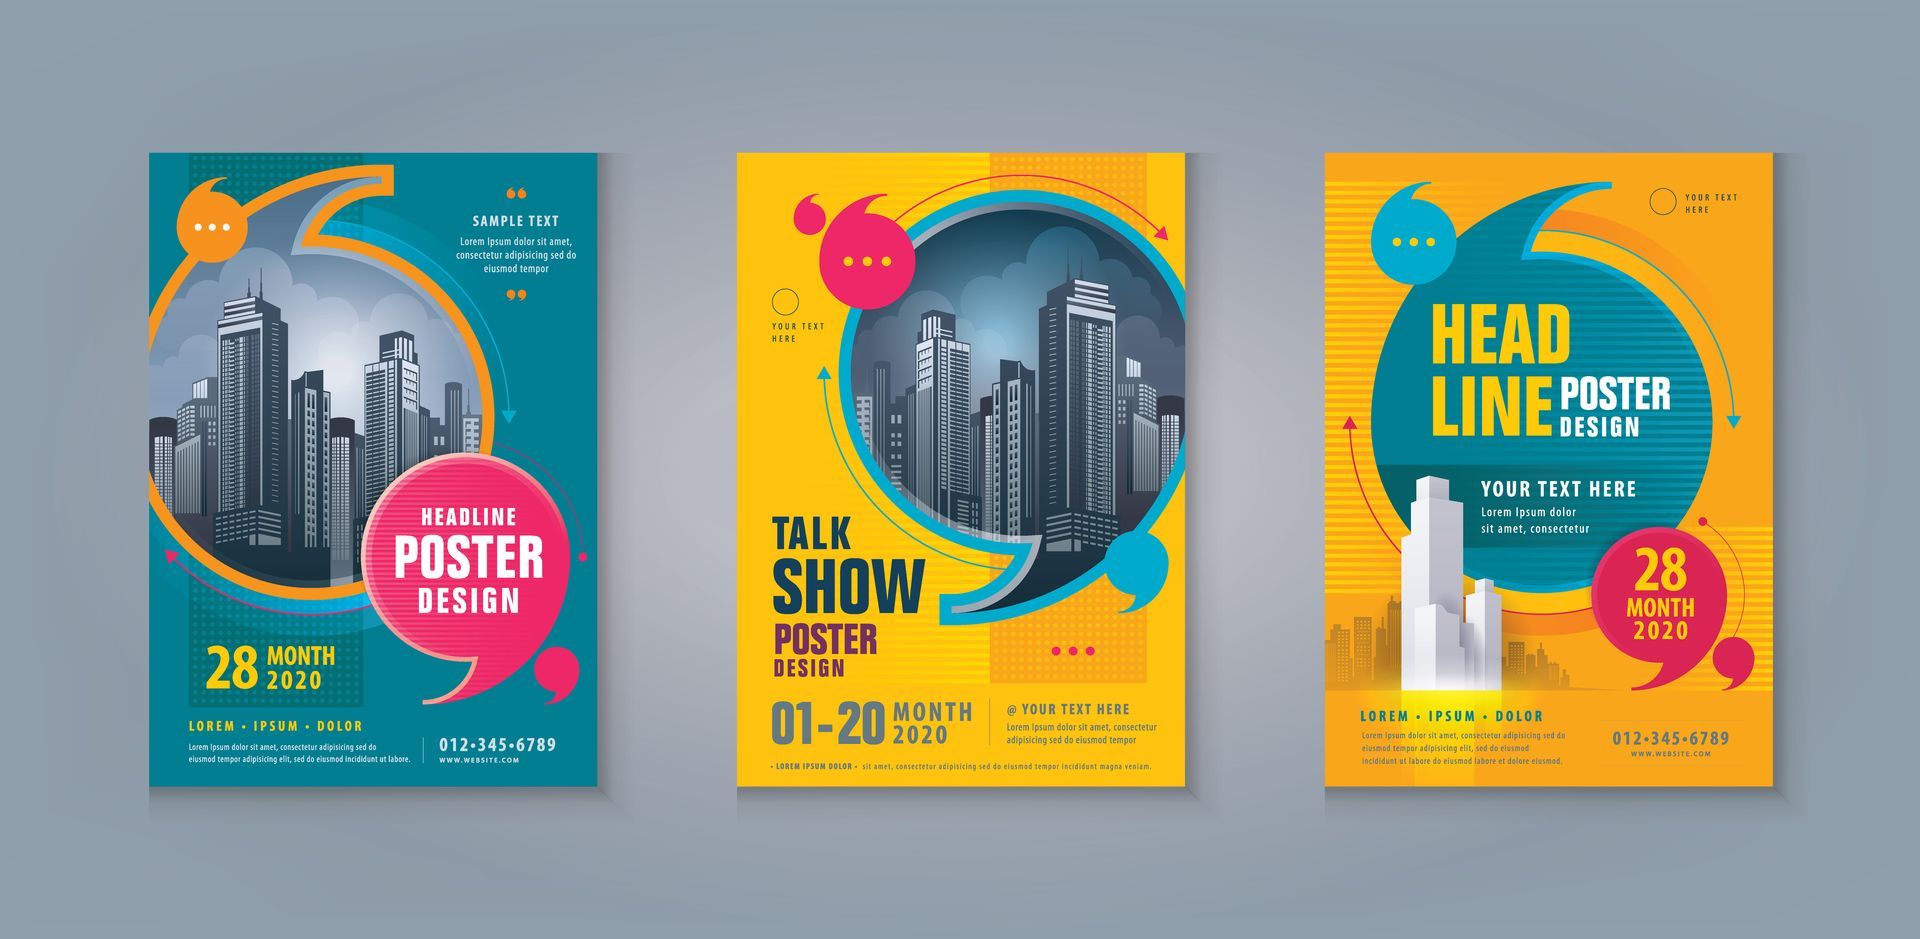 Paradise Valley Custom Posters For Conferences & Trade Shows